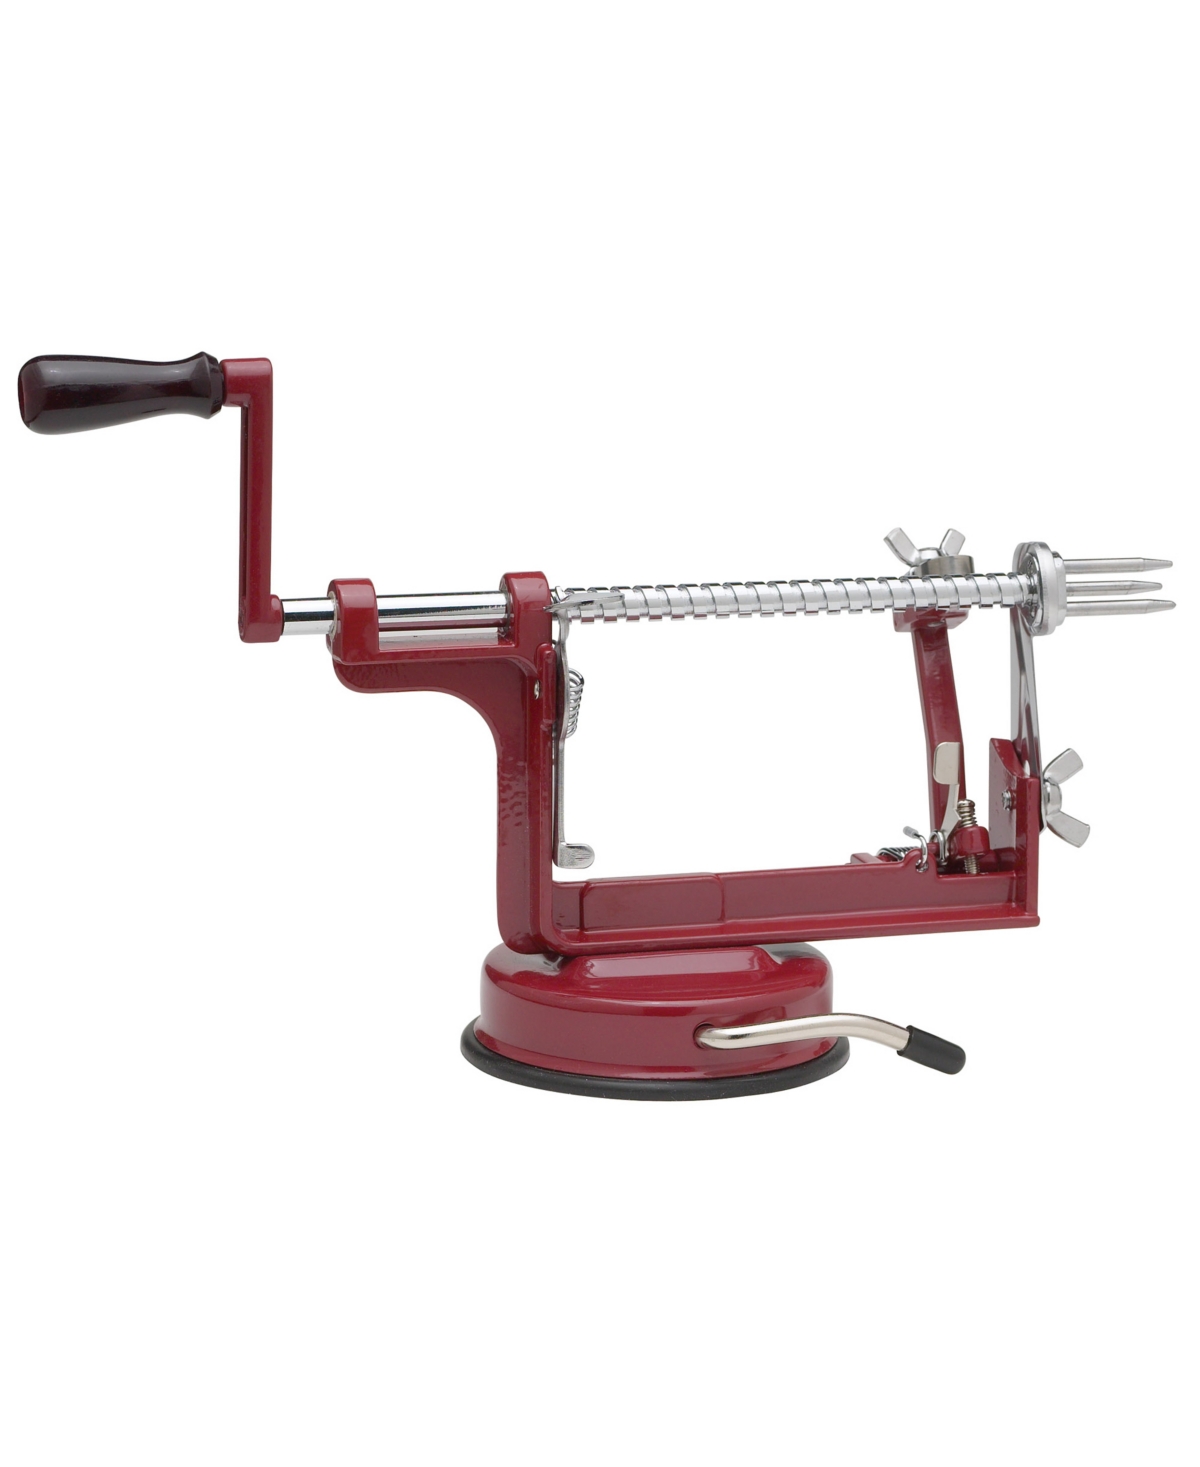 Mrs. Anderson's Baking Apple Peeling Machine With Suction Base, 10" X 4.5" X 5.25" In Red